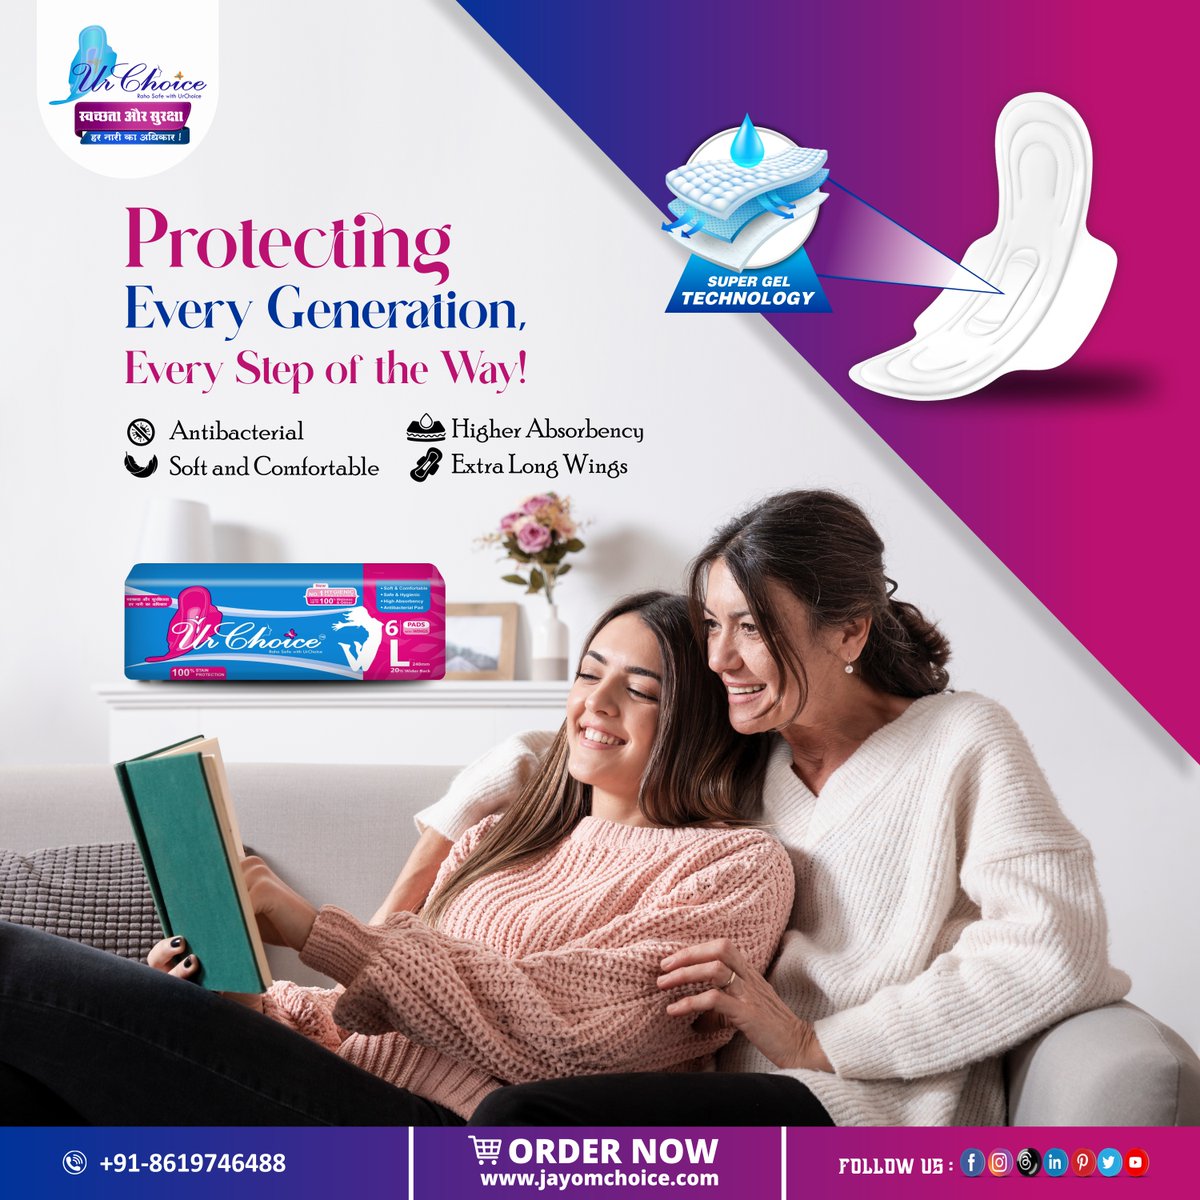 Protecting Every Generation, Every Step of the Way! Ur Choice Sanitary Pads, Safeguarding Mothers and Daughters with Comfort and Confidence.
Order Now : jayomchoice.com
#StayPrepared #urchoice #PeriodProtection #leakagefree #Absorption #Period #SanitaryPads #Kalki2898AD